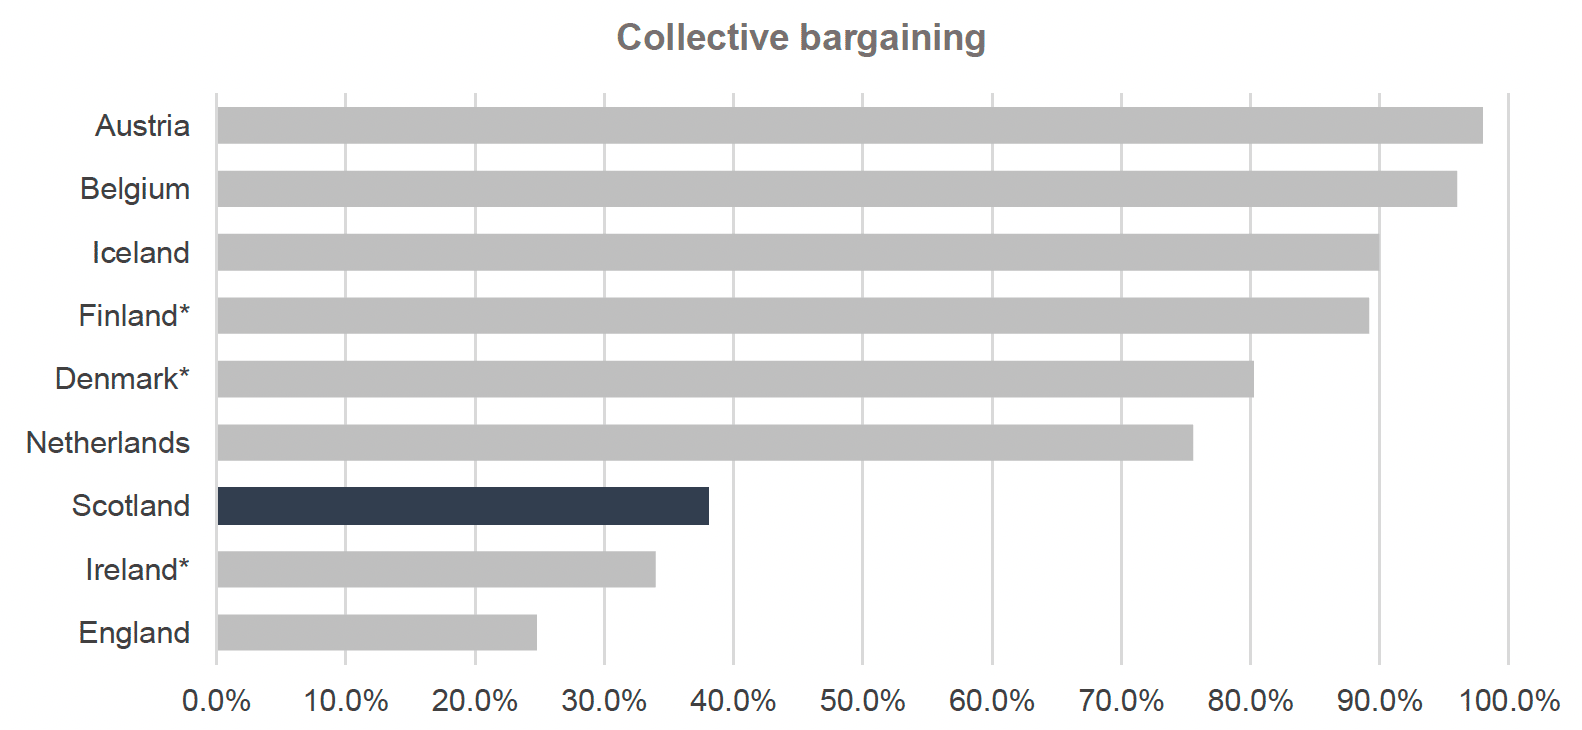 Graph depicts the percentage of workers who are affected by collective bargaining in countries in the International Framework in 2019 in a bar chart highlighting Scotland’s figure in a different colour. Scotland ranks fifth out of six countries. There was no data available for Ireland, Denmark, and Finland in 2019. In Austria, 98% of workers are affected by collective bargaining. In Belgium, 96% of workers are affected by collective bargaining. In Iceland, 90% of workers are affected by collective bargaining. In the Netherlands 75.6% of workers are affected by collective bargaining. In Scotland, 38.1% of workers are affected by collective bargaining. Finally in England, 24.8% of workers are affected by collective bargaining.